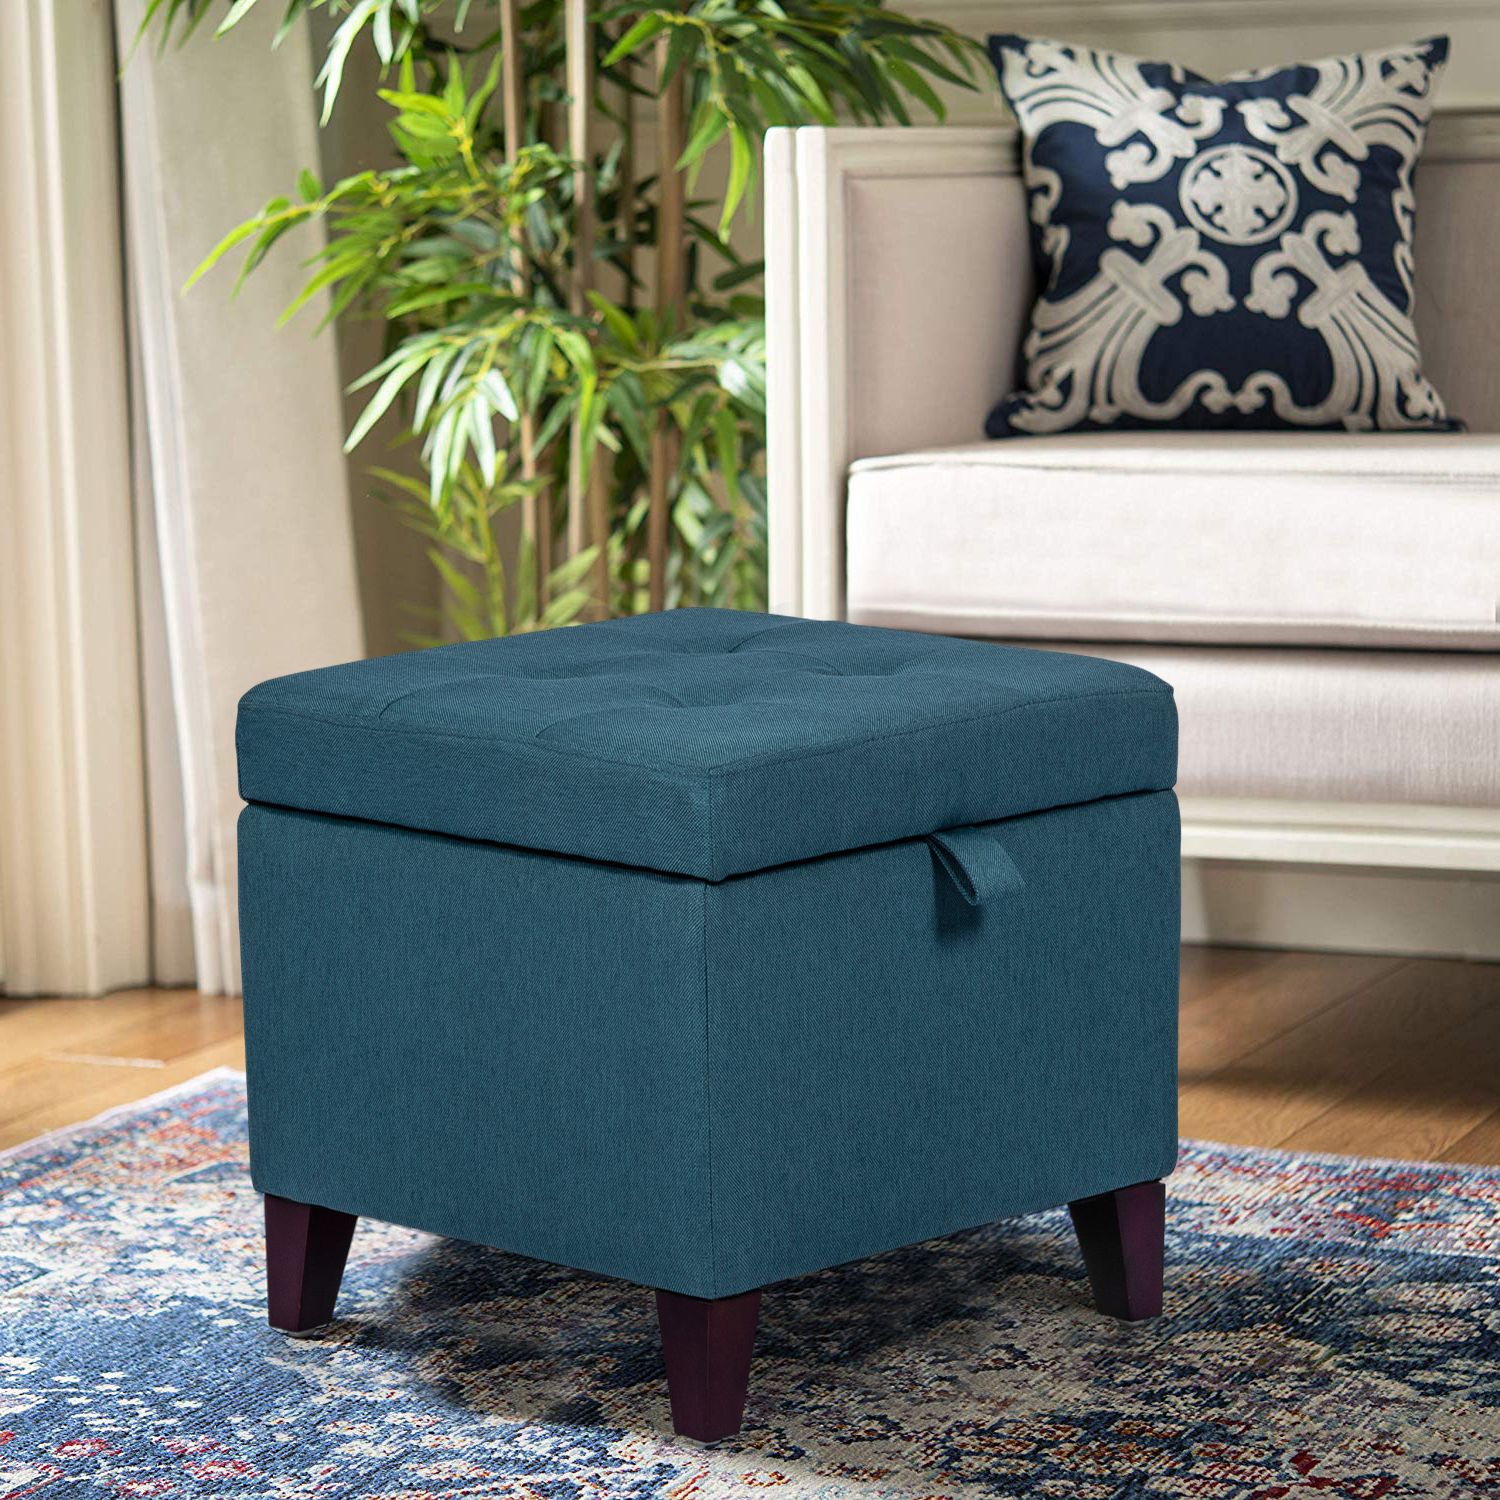 Preferred Lavender Fabric Storage Ottomans Throughout Joveco Fabric Storage Ottoman Button Tufted Footrest With Hinged Lid (View 7 of 10)